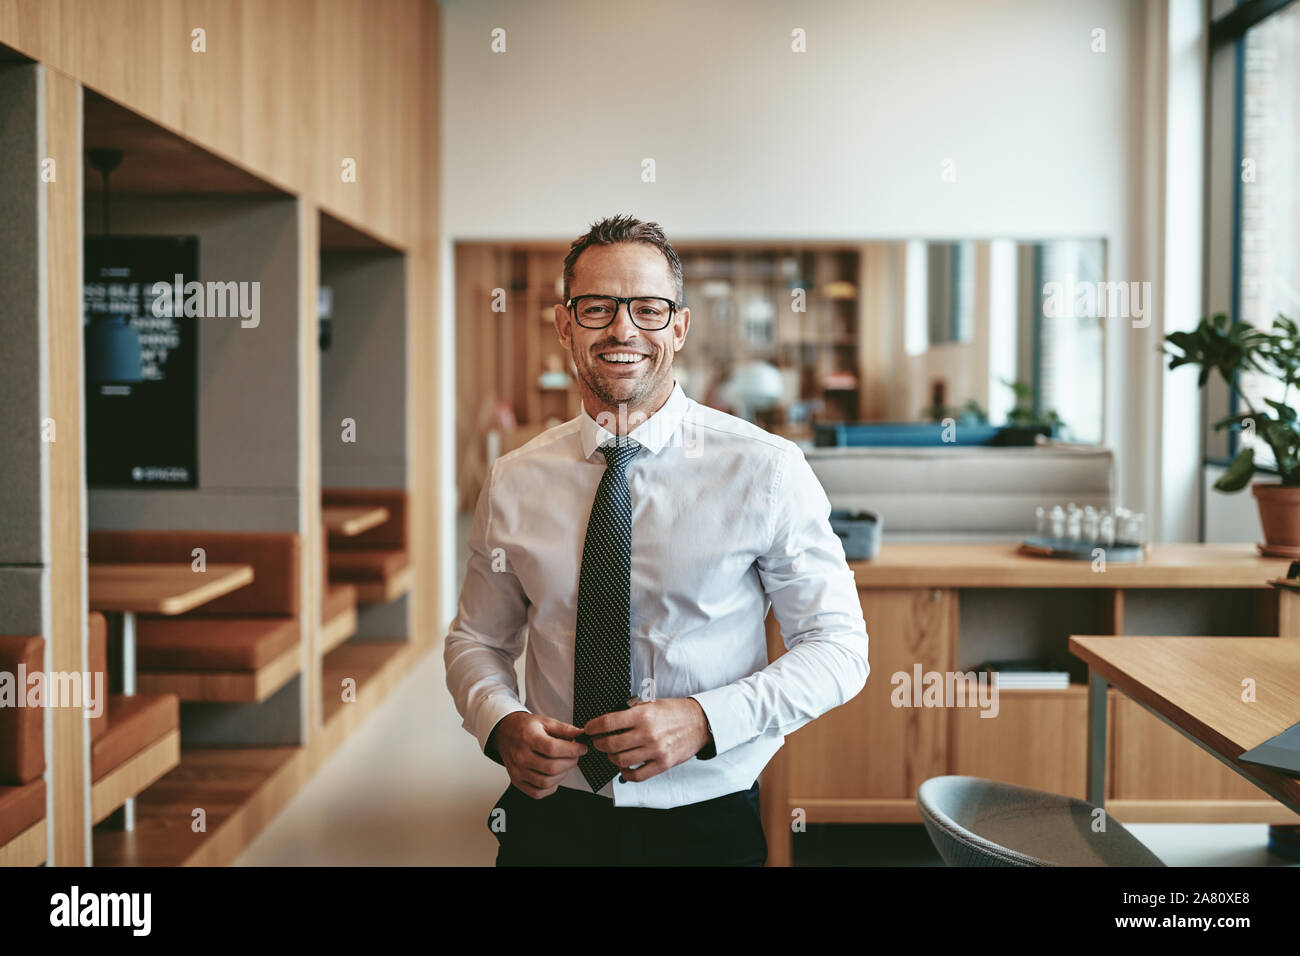 Mature businessman smiling confidently while standing alone in the cafeteria of a bright moderrn office Stock Photo